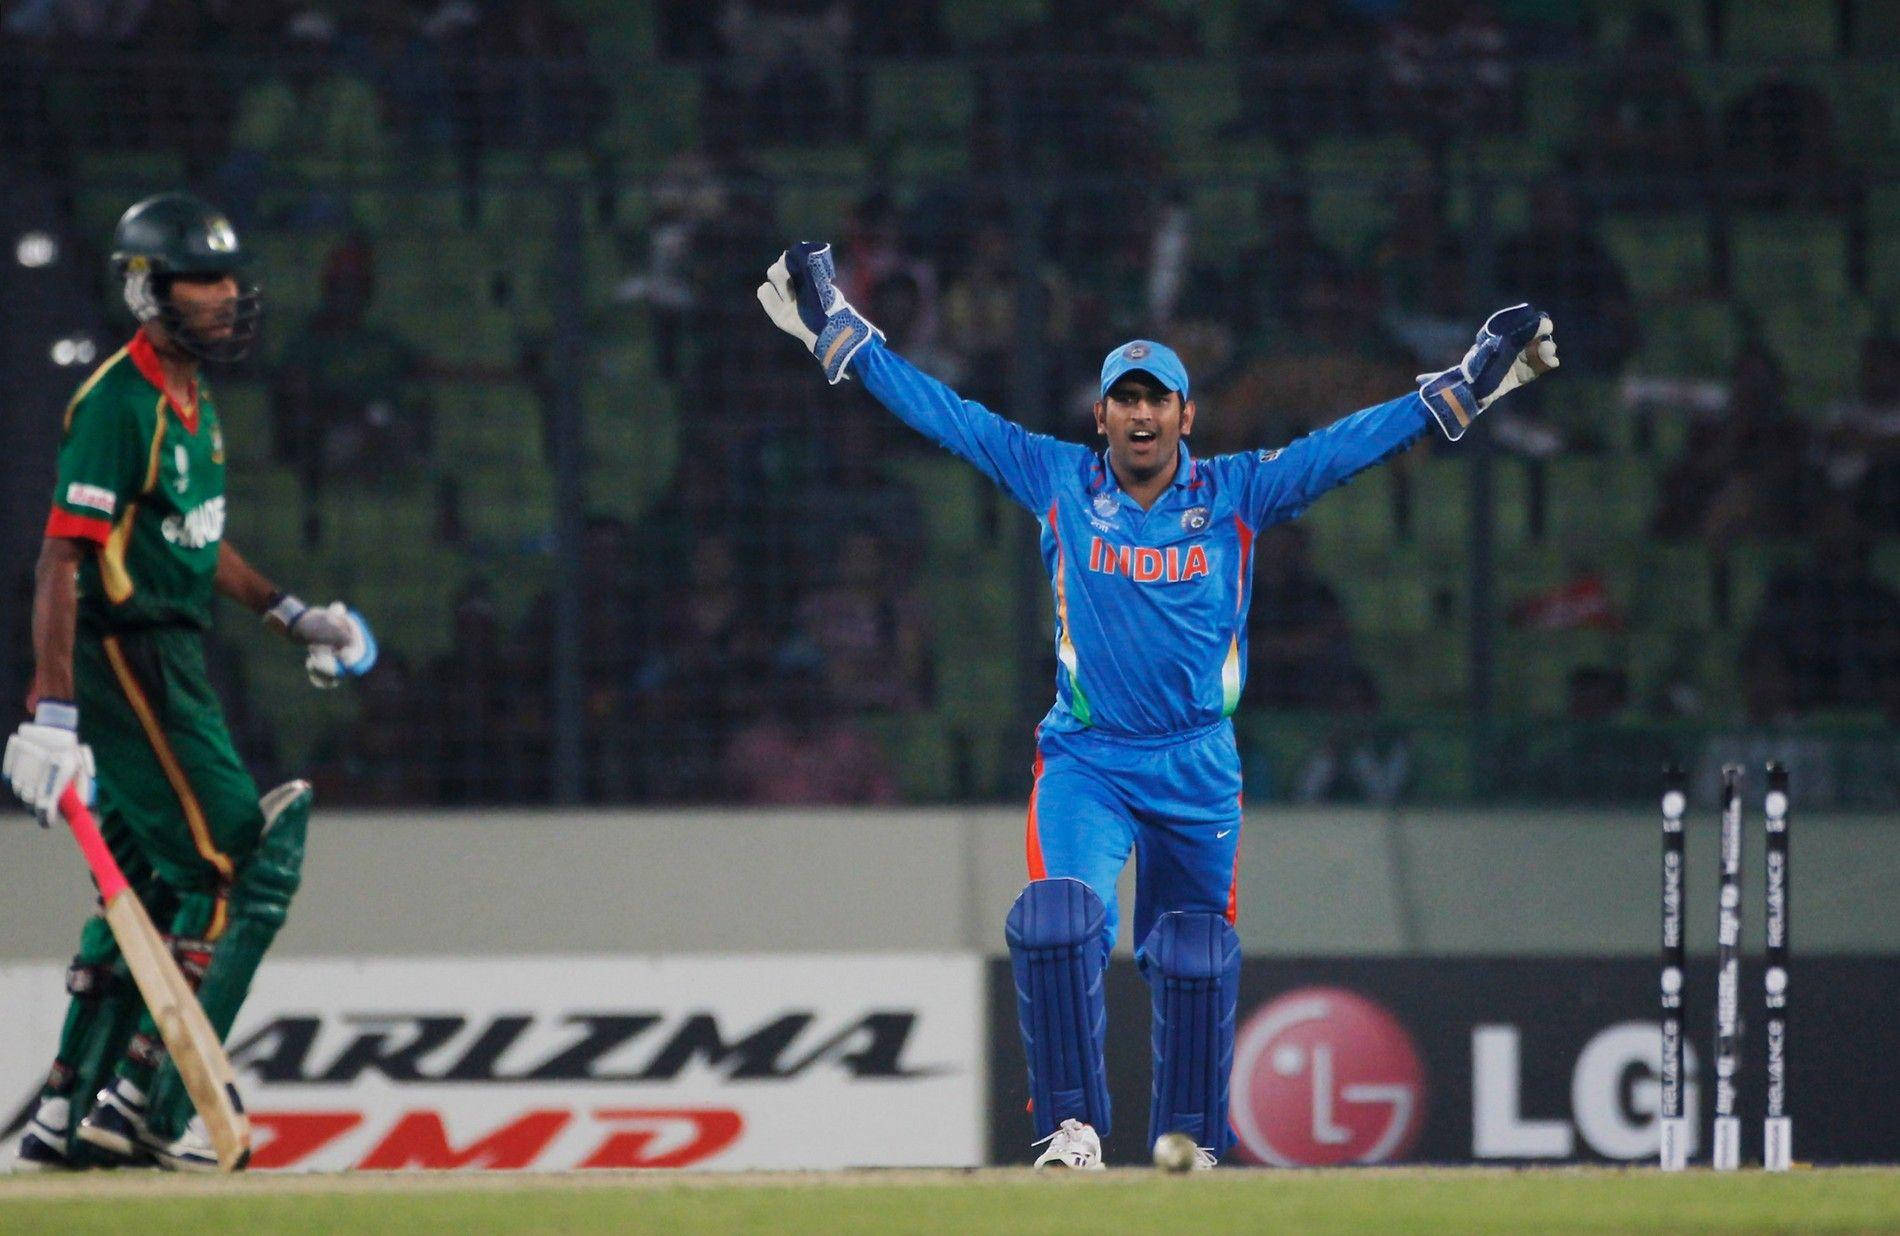 Ms Dhoni Celebrating In Cricket Field Background